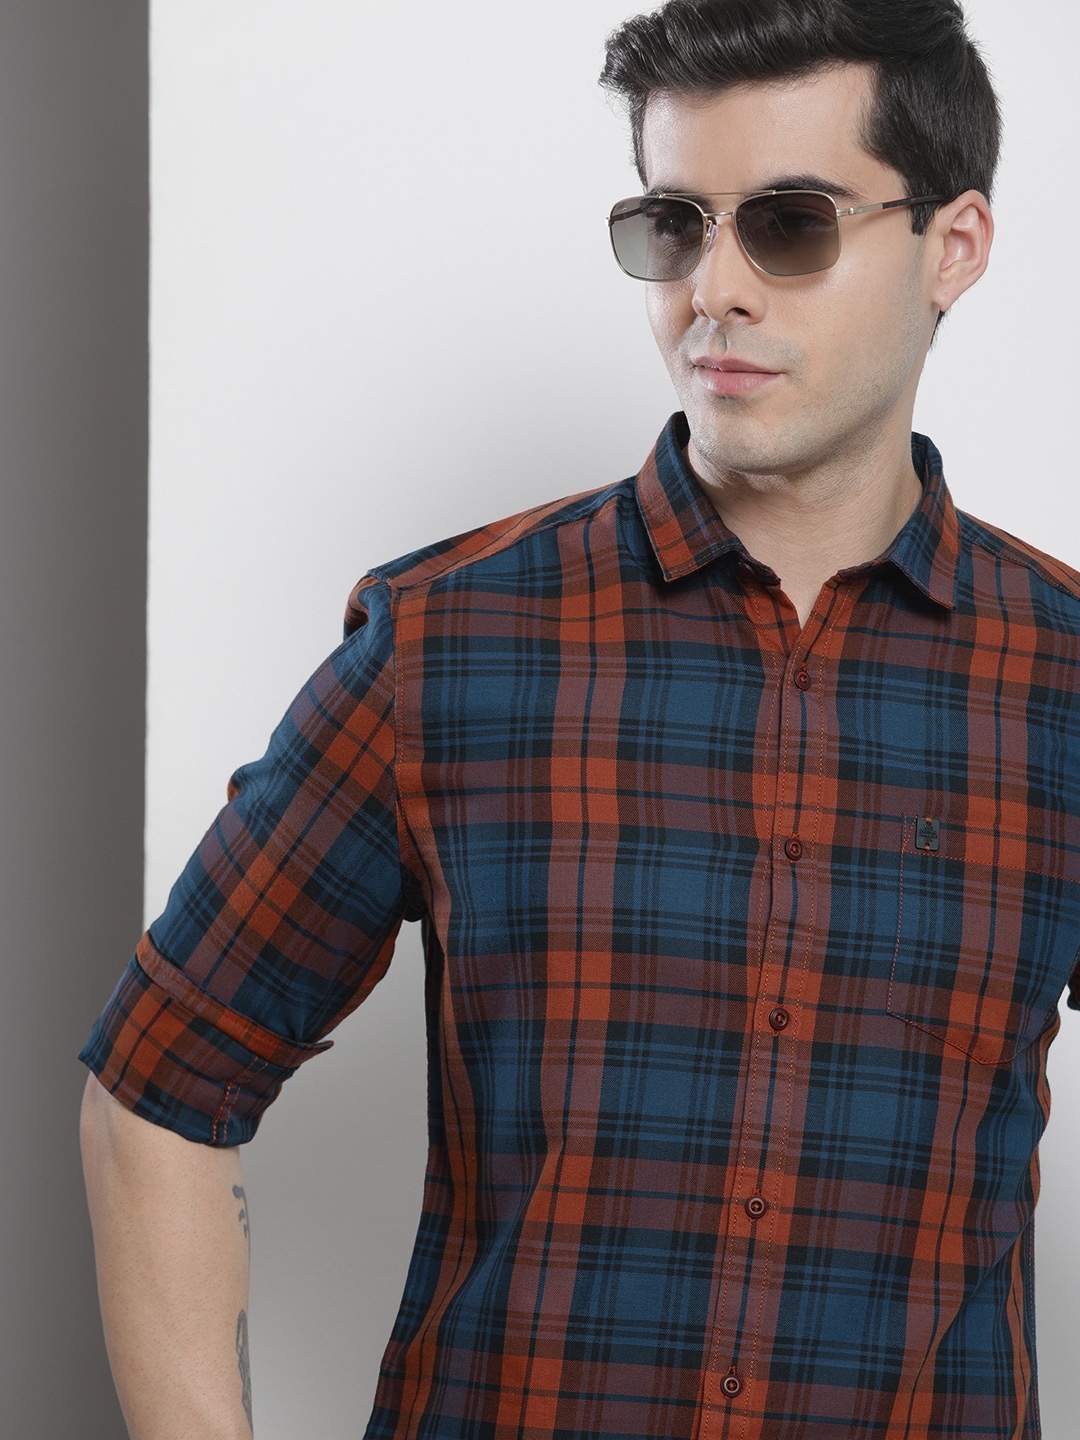 The Indian Garage Co Men Navy Blue & Orange Checked Pure Cotton Casual Shirt